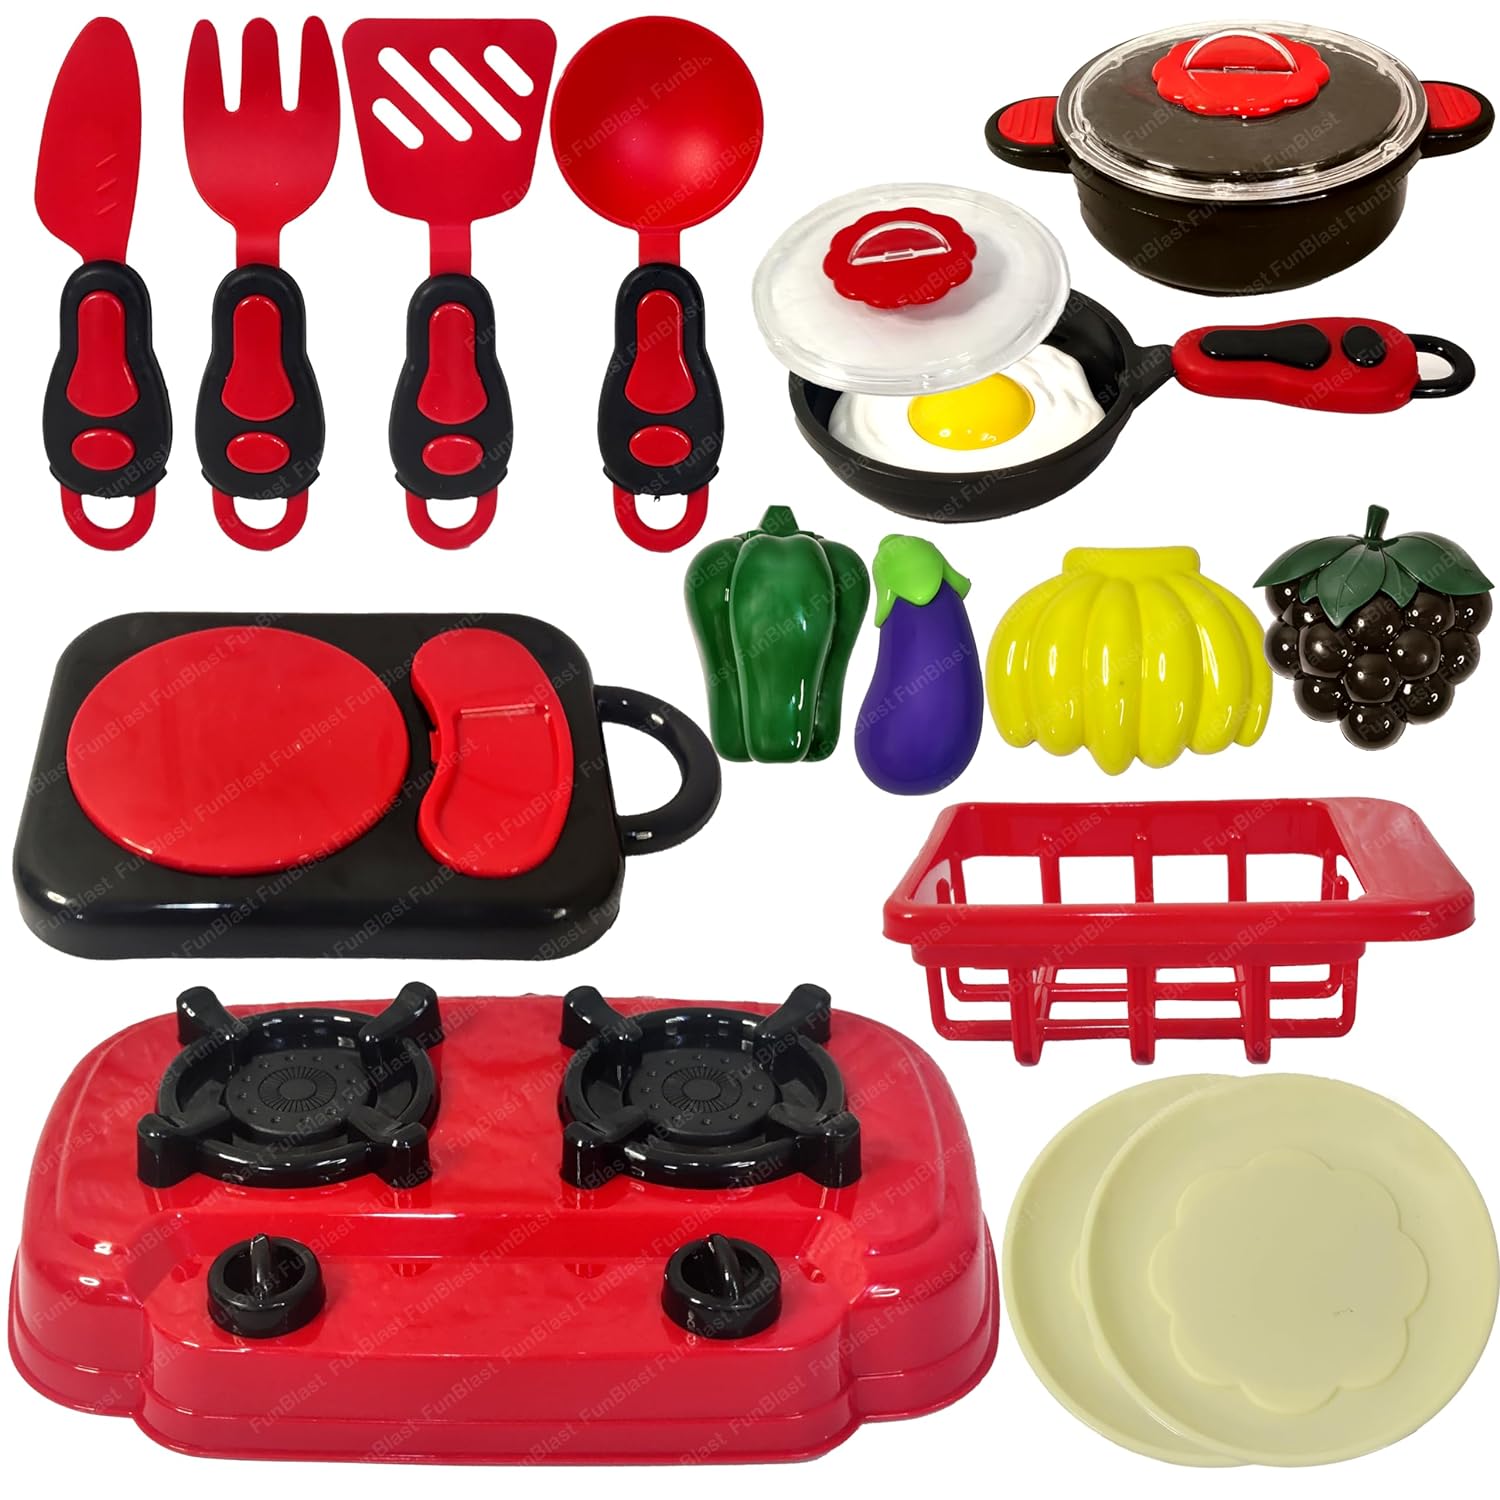 Kitchen Play Set Toys – Cooking Set with Utensils